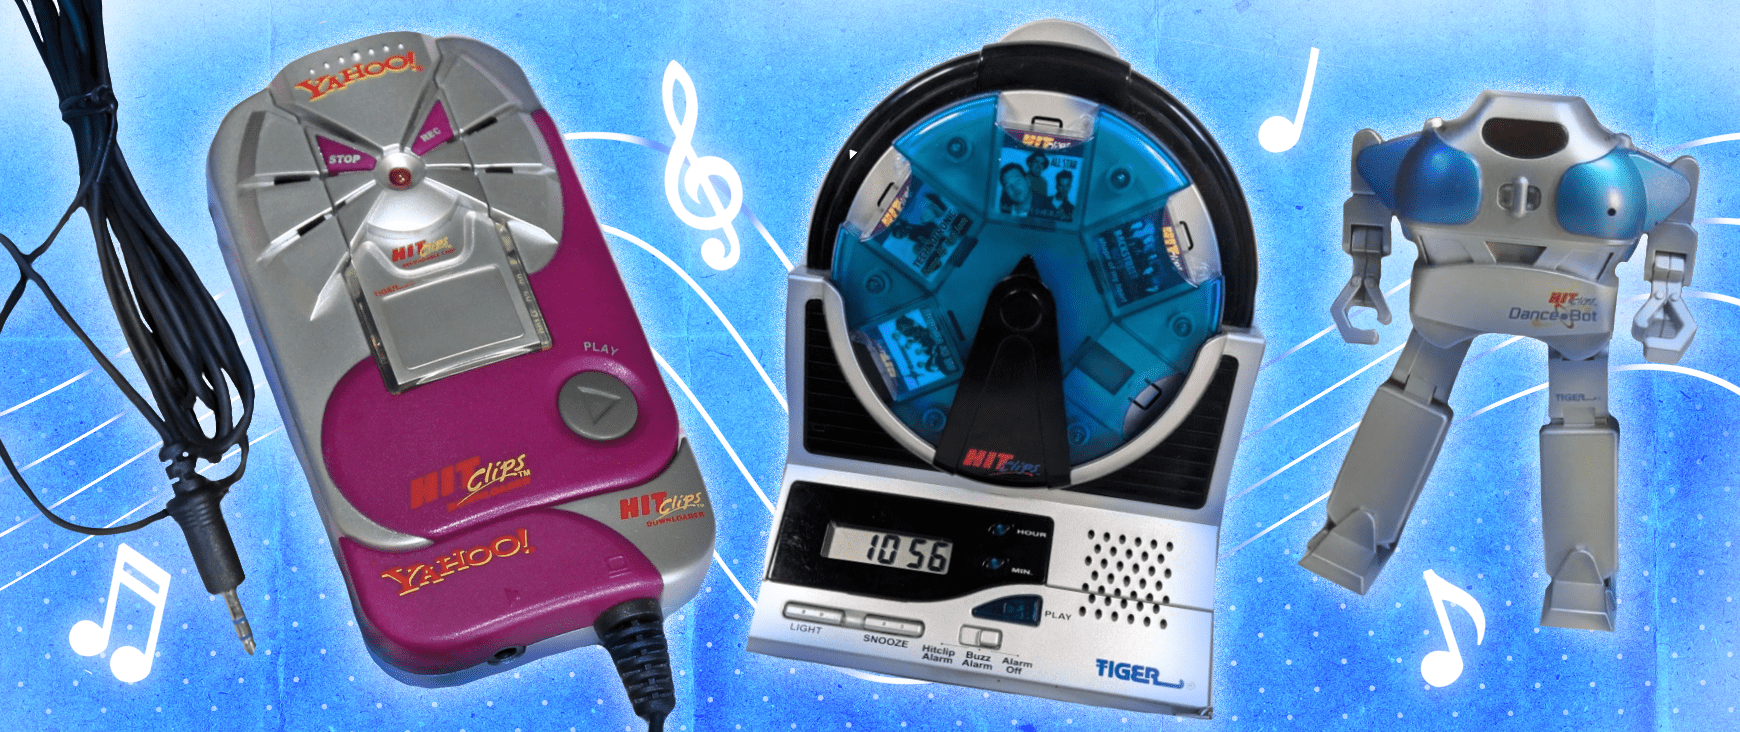 Idk what inspired me to make hit clips asmr but here we are #hitclips , Toys